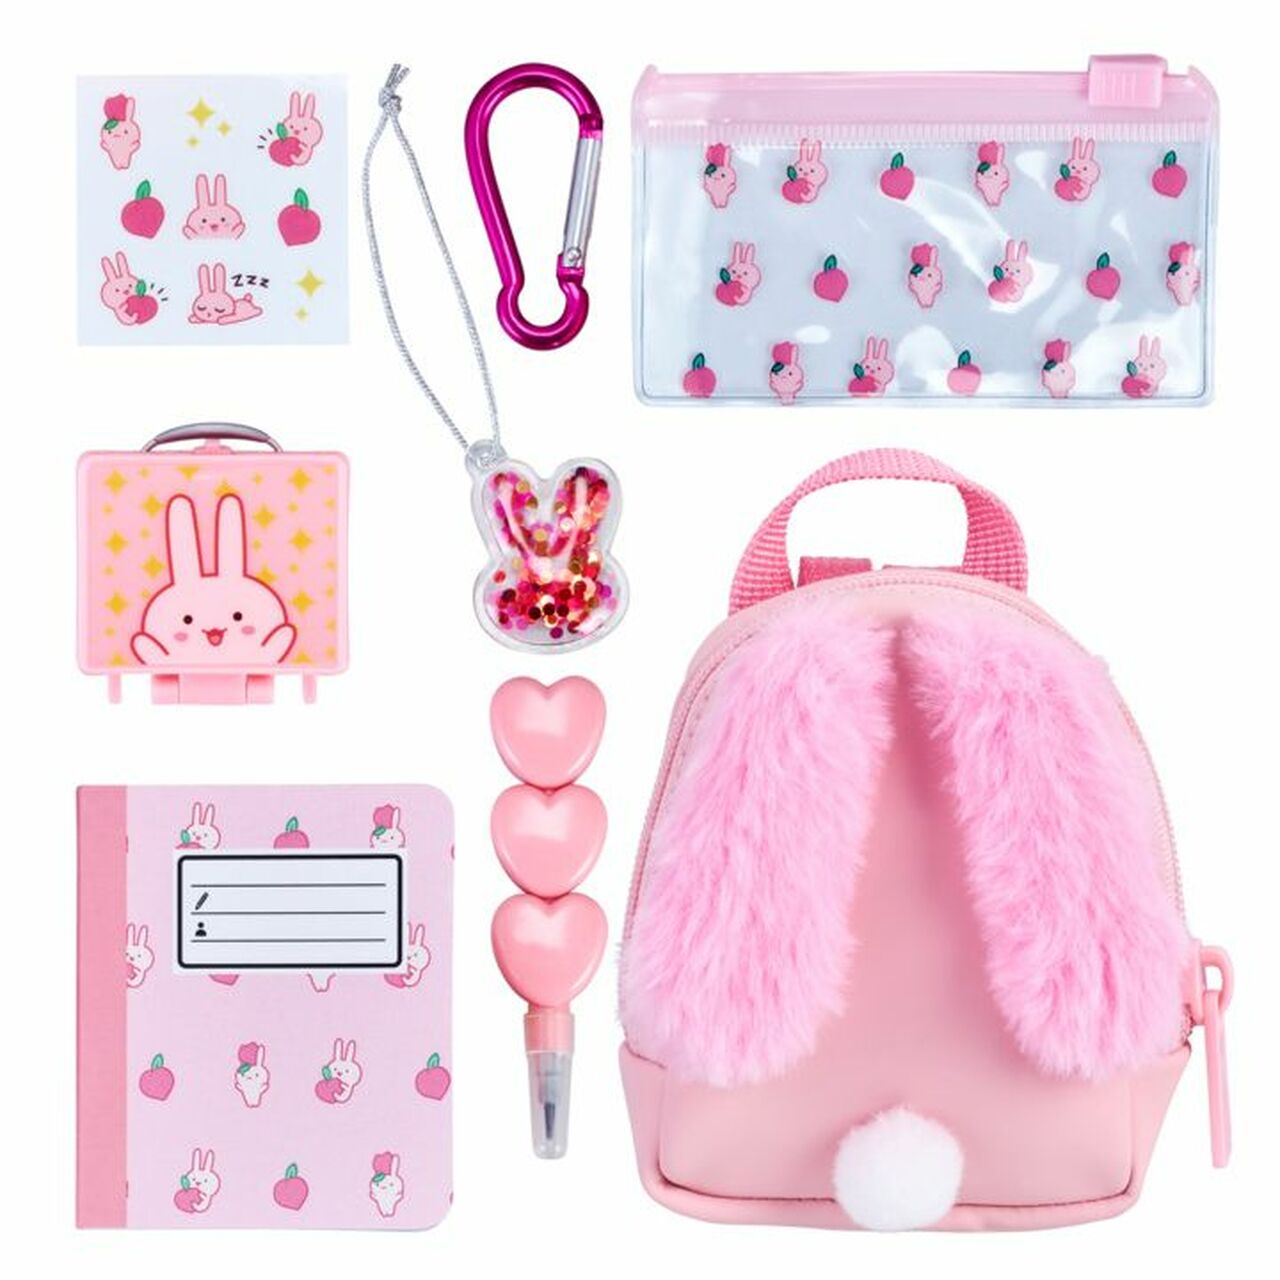 Claire's - Real Littles handbags are really cute! 💖 Each